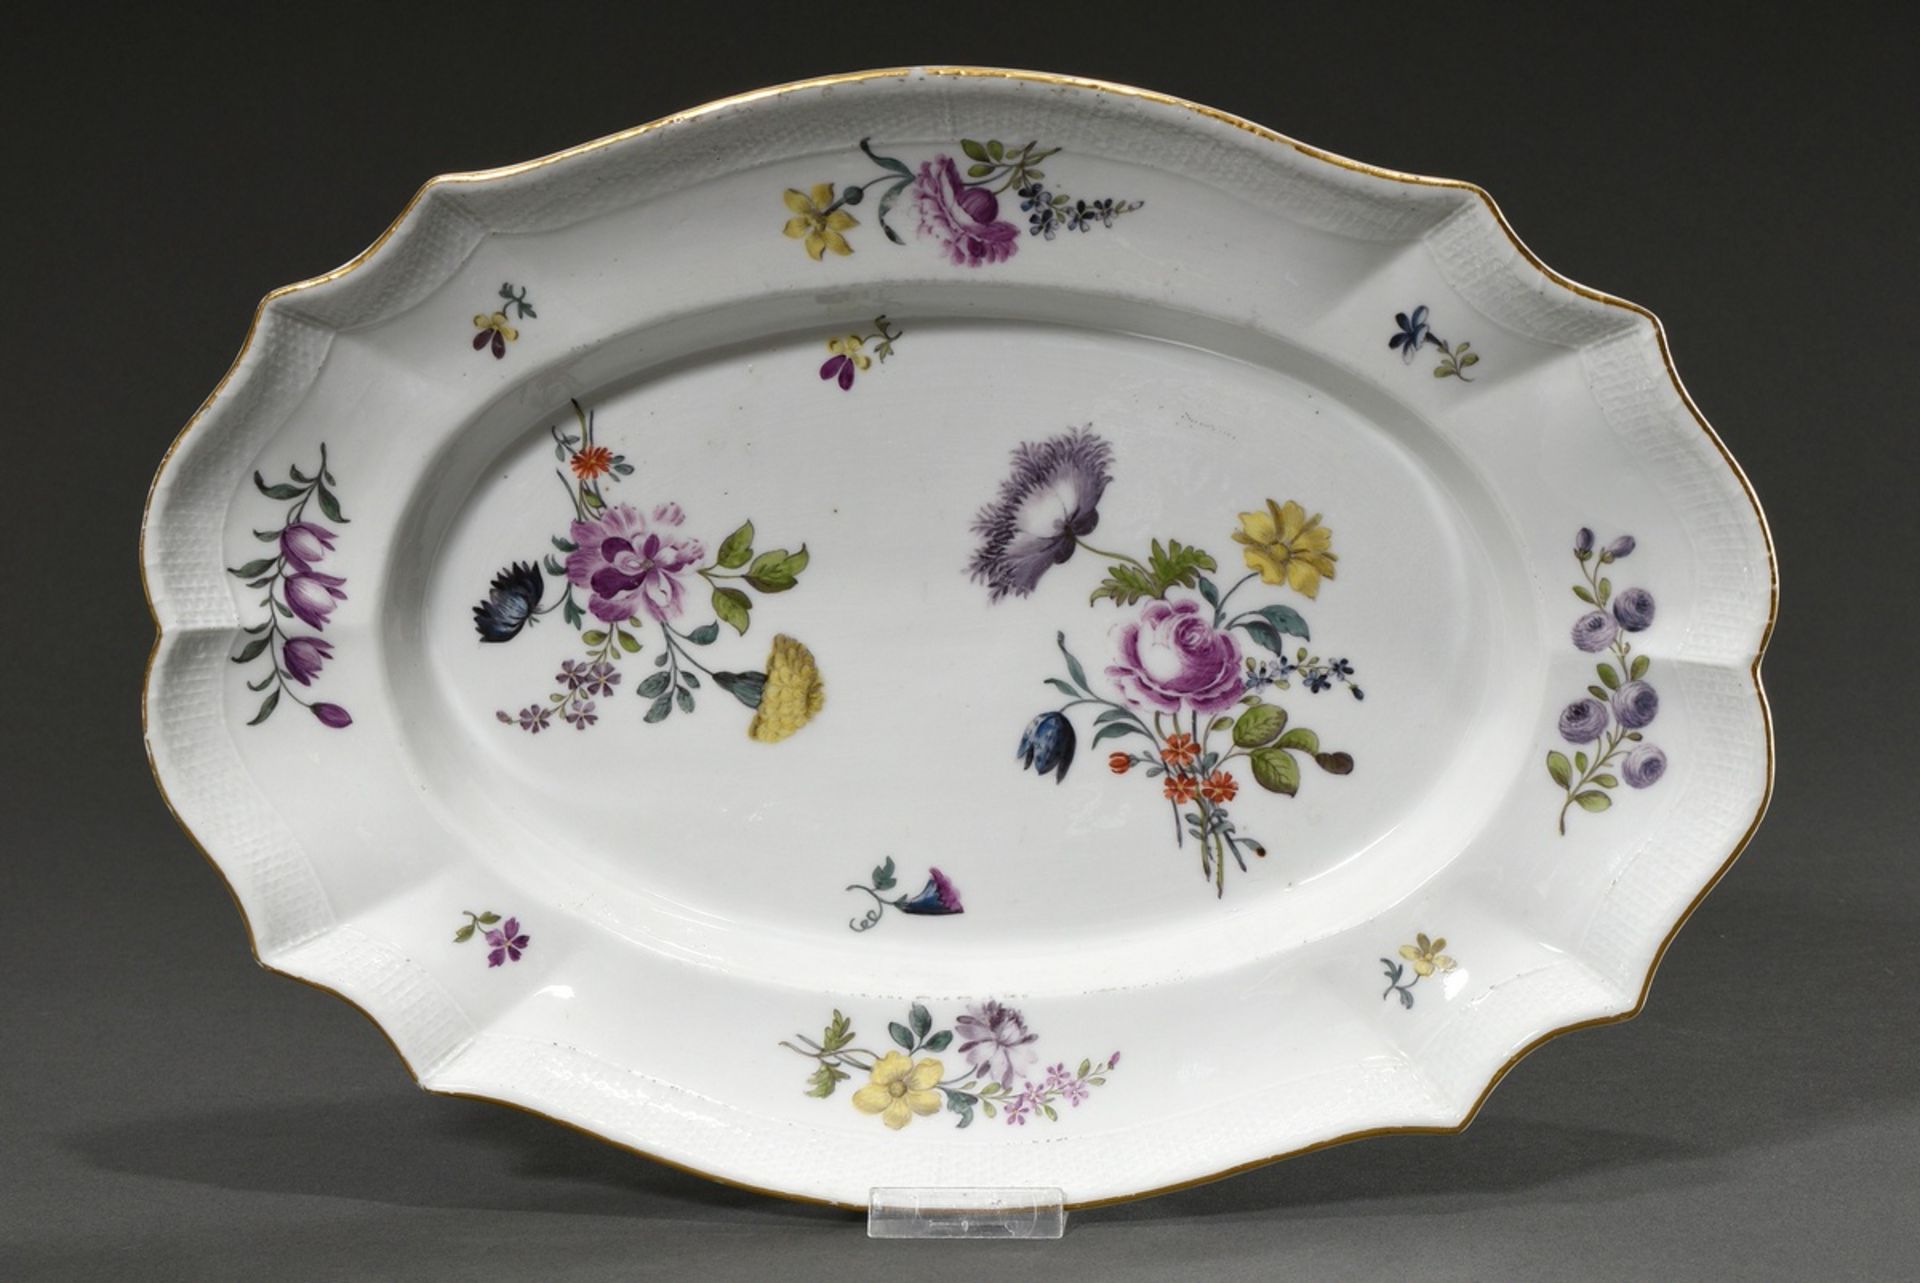 Oval Meissen plate with polychrome floral painting and basket relief as well as gold rim, 18th cent